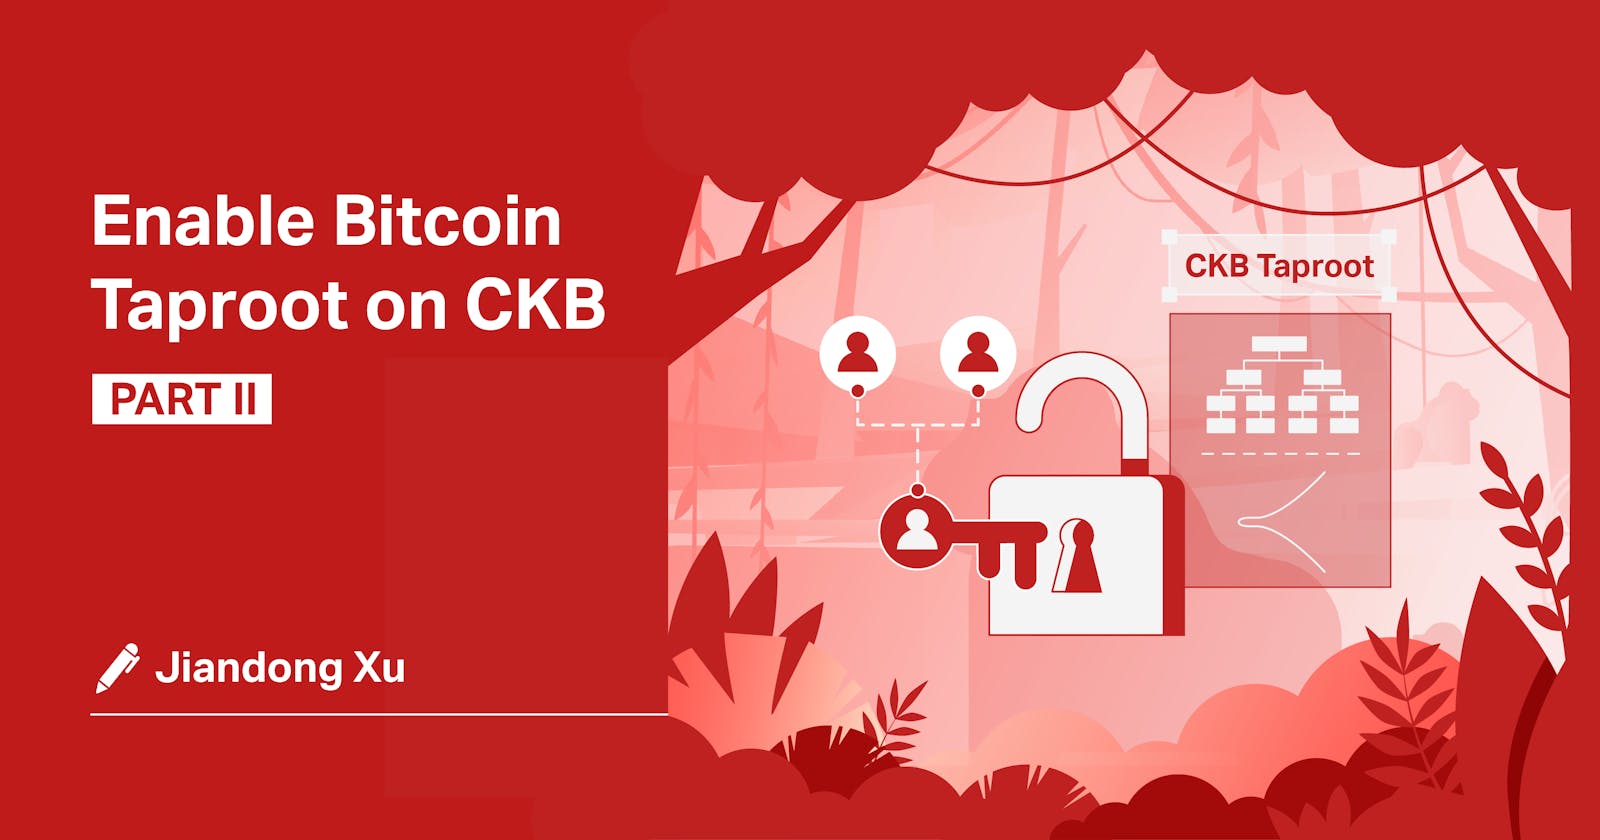 Enable Bitcoin Taproot on CKB (Part II)